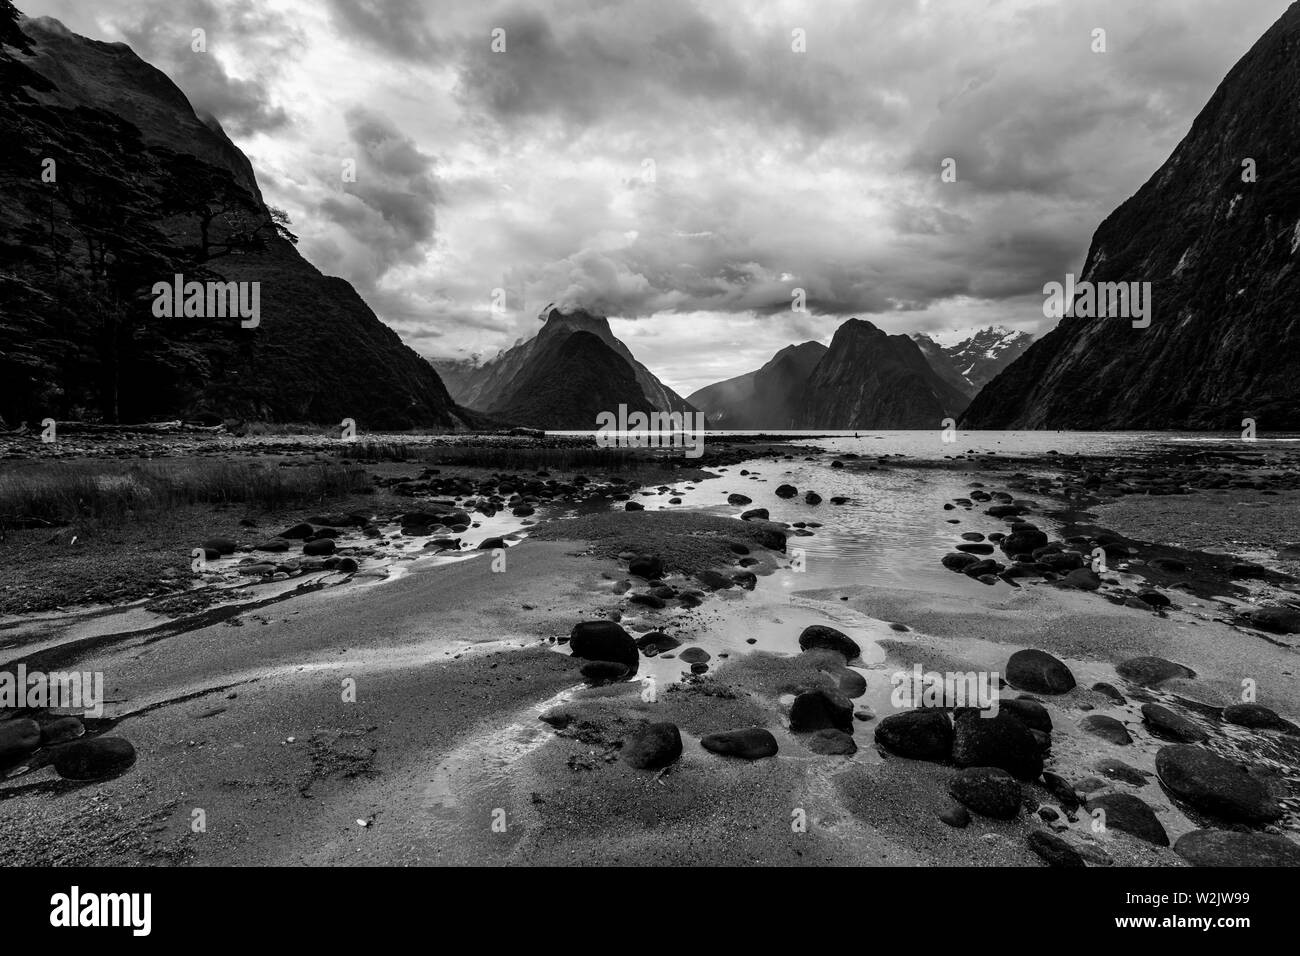 Milford Sound, Fiordland National Park, South Island, New Zealand Banque D'Images